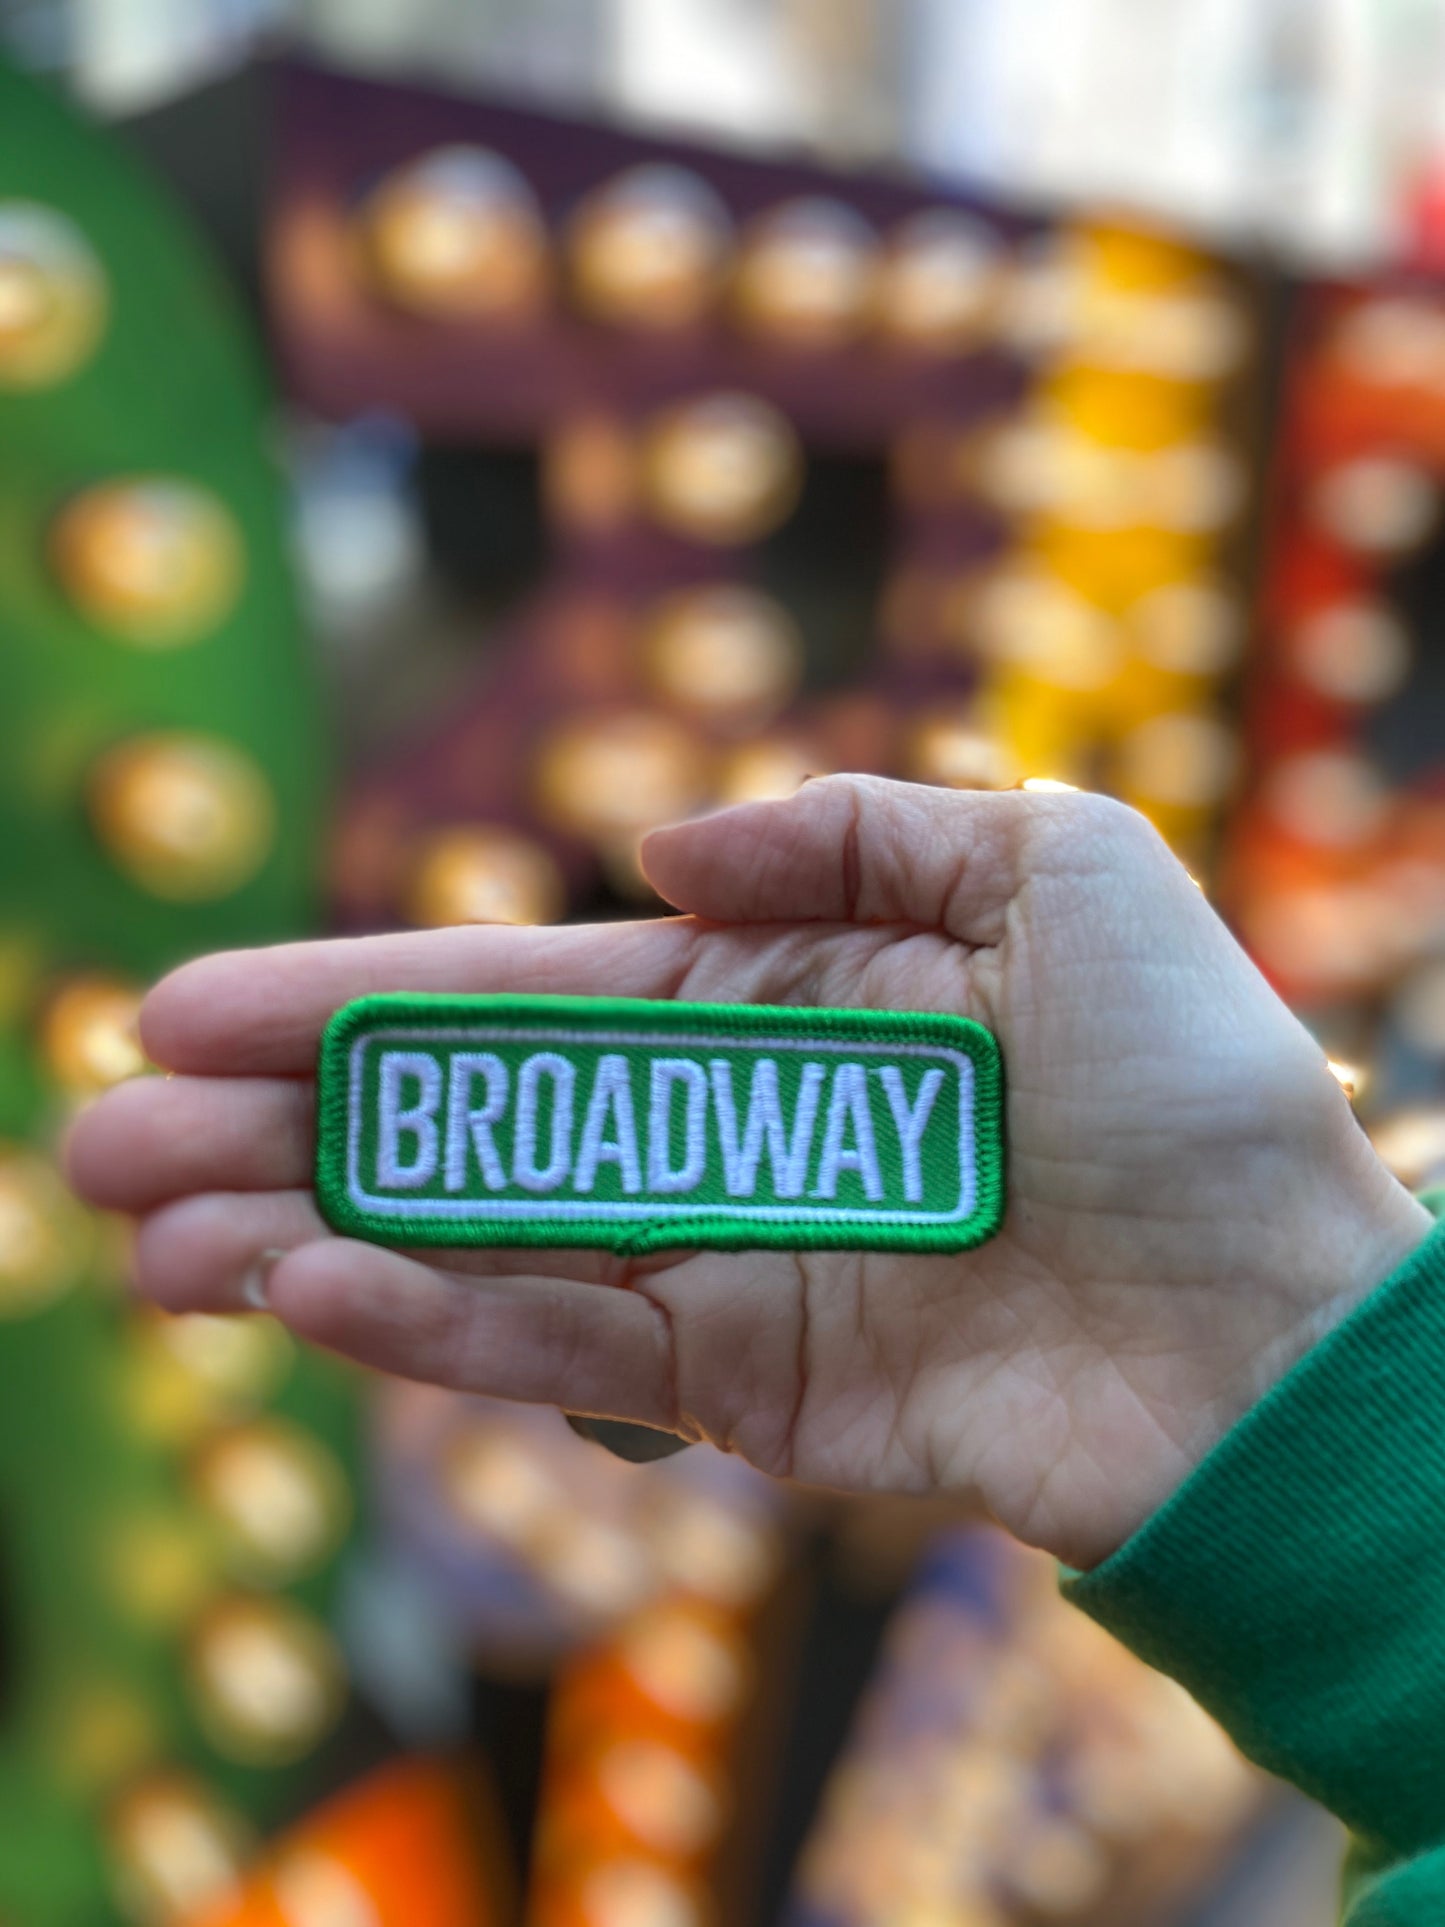 Broadway Street Sign Embroidered Patch